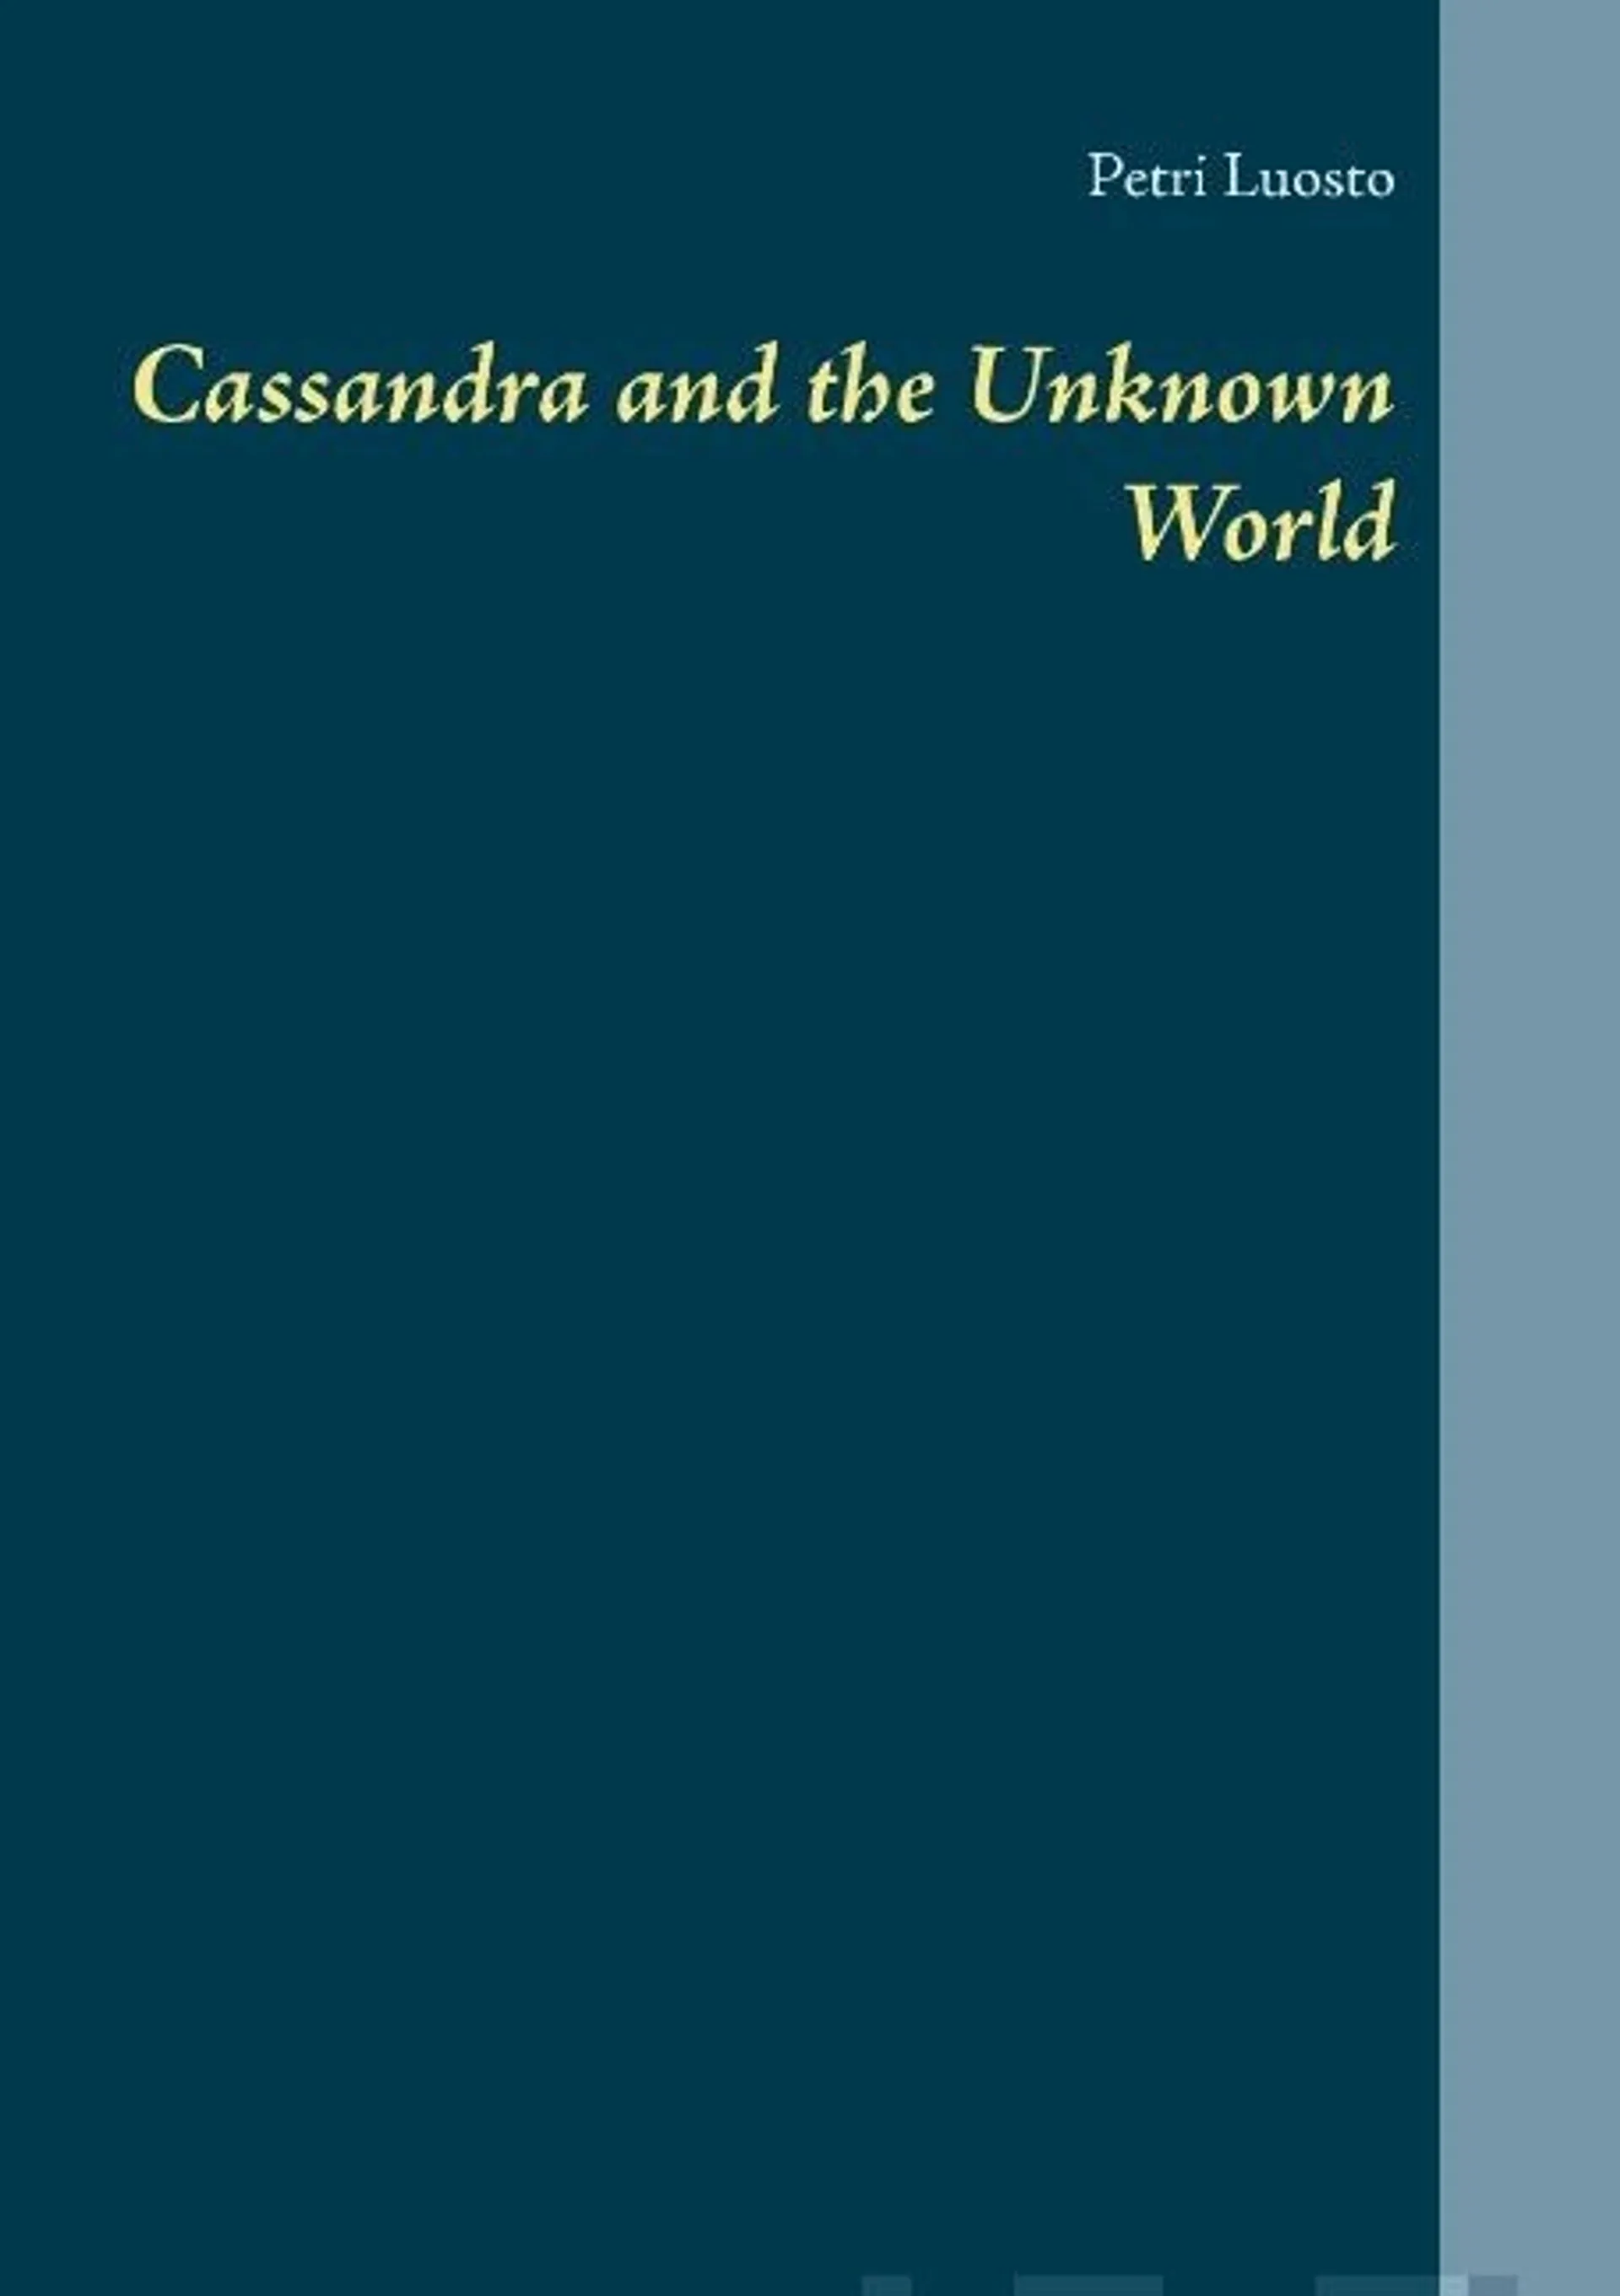 Luosto, Cassandra and the Unknown World